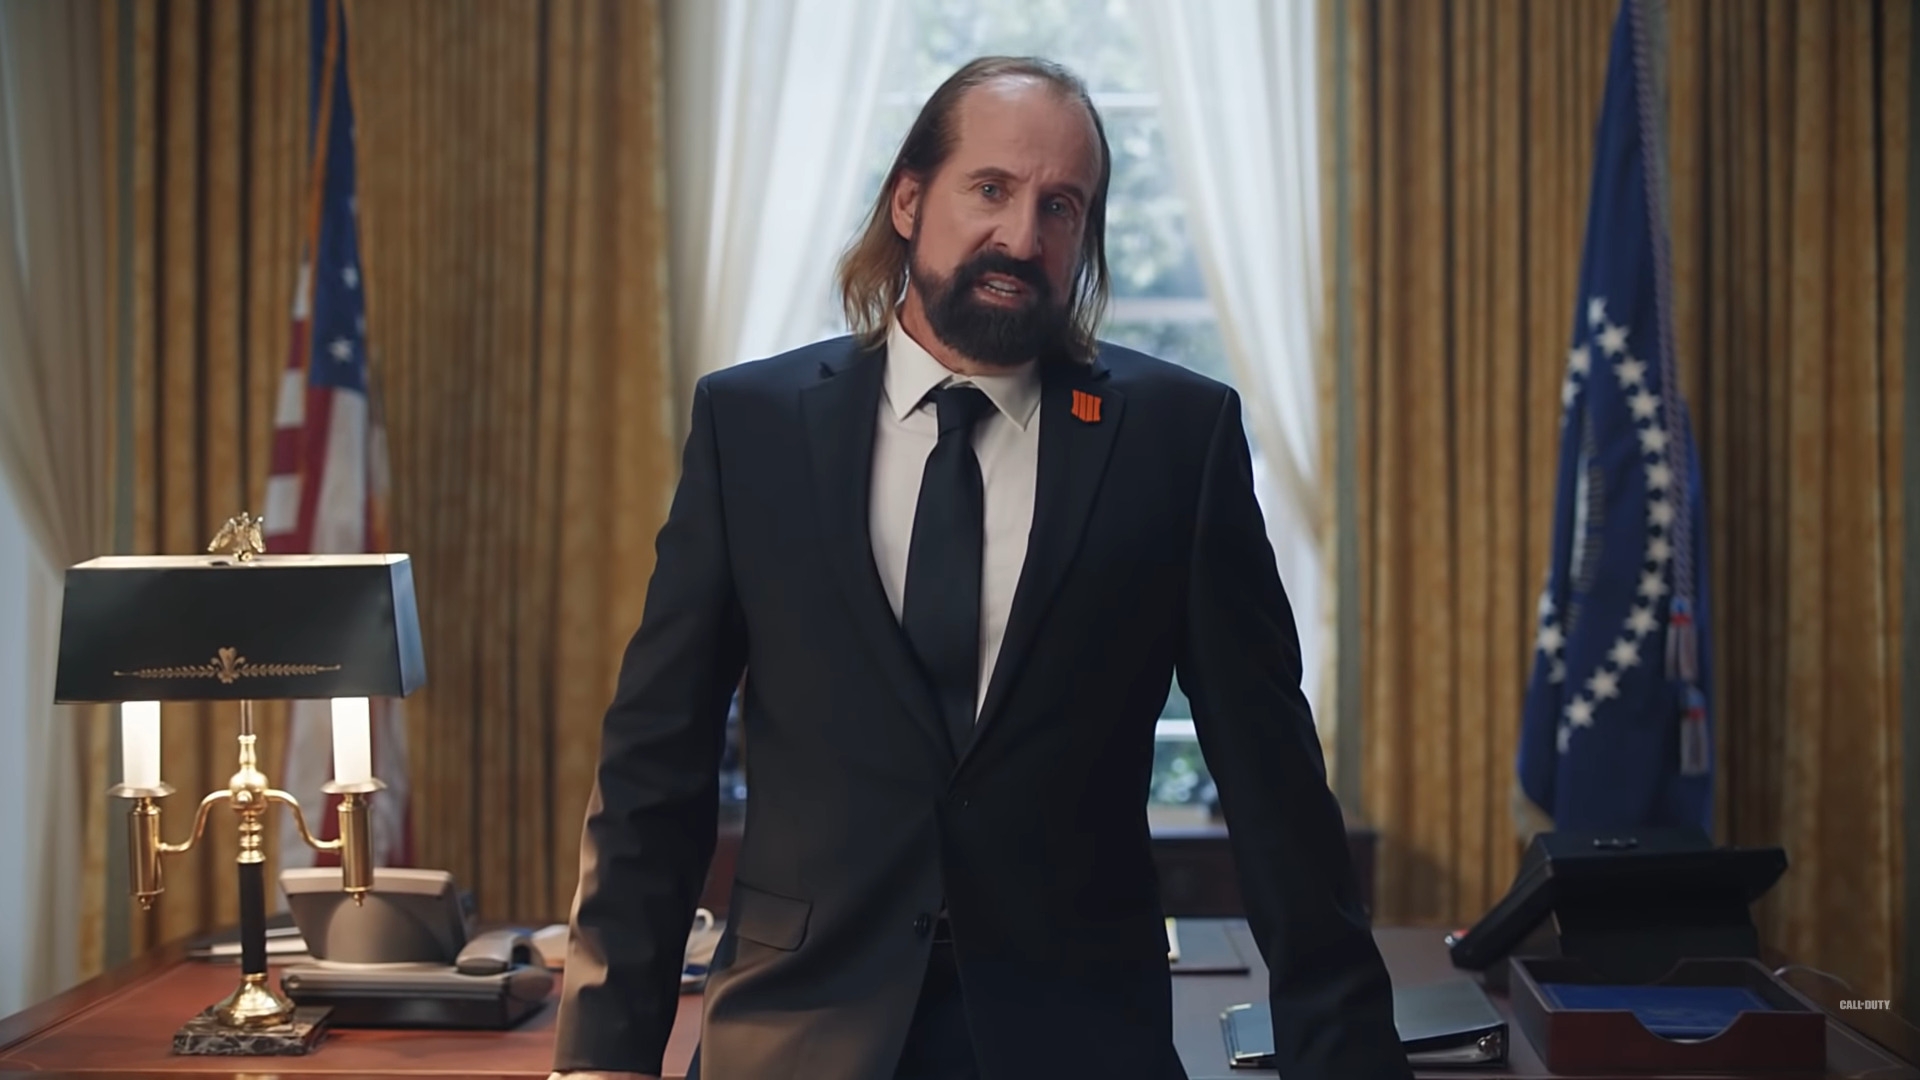 Peter Stormare, Black Ops 4, Call of Duty, Activision, The Replacer, Treyarch